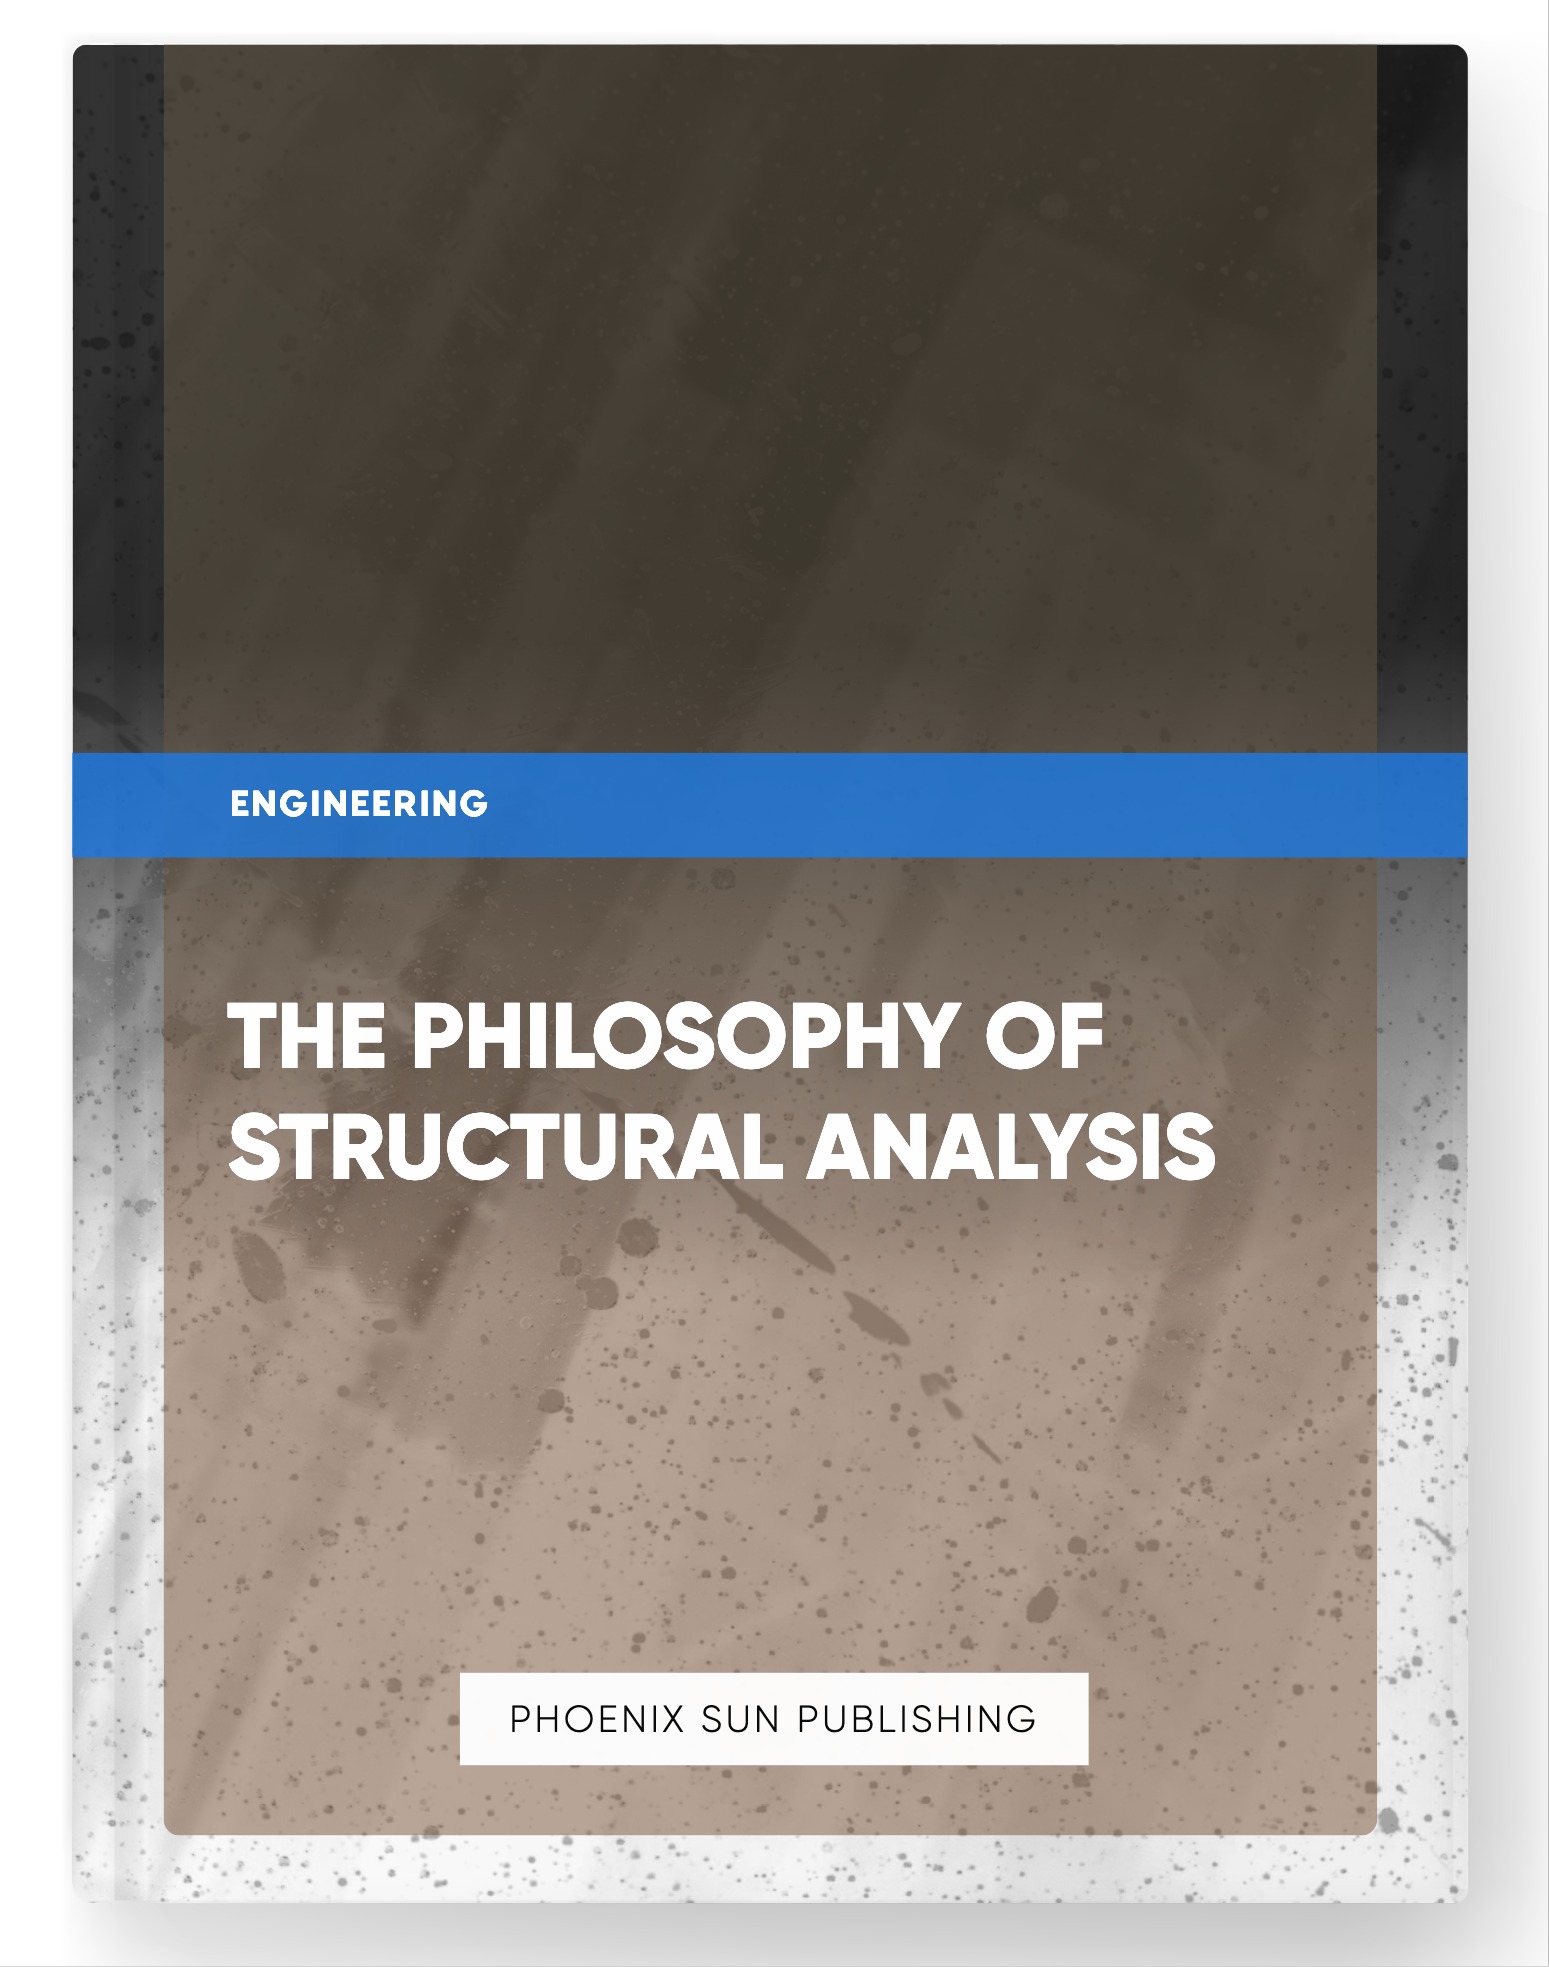 The Philosophy of Structural Analysis